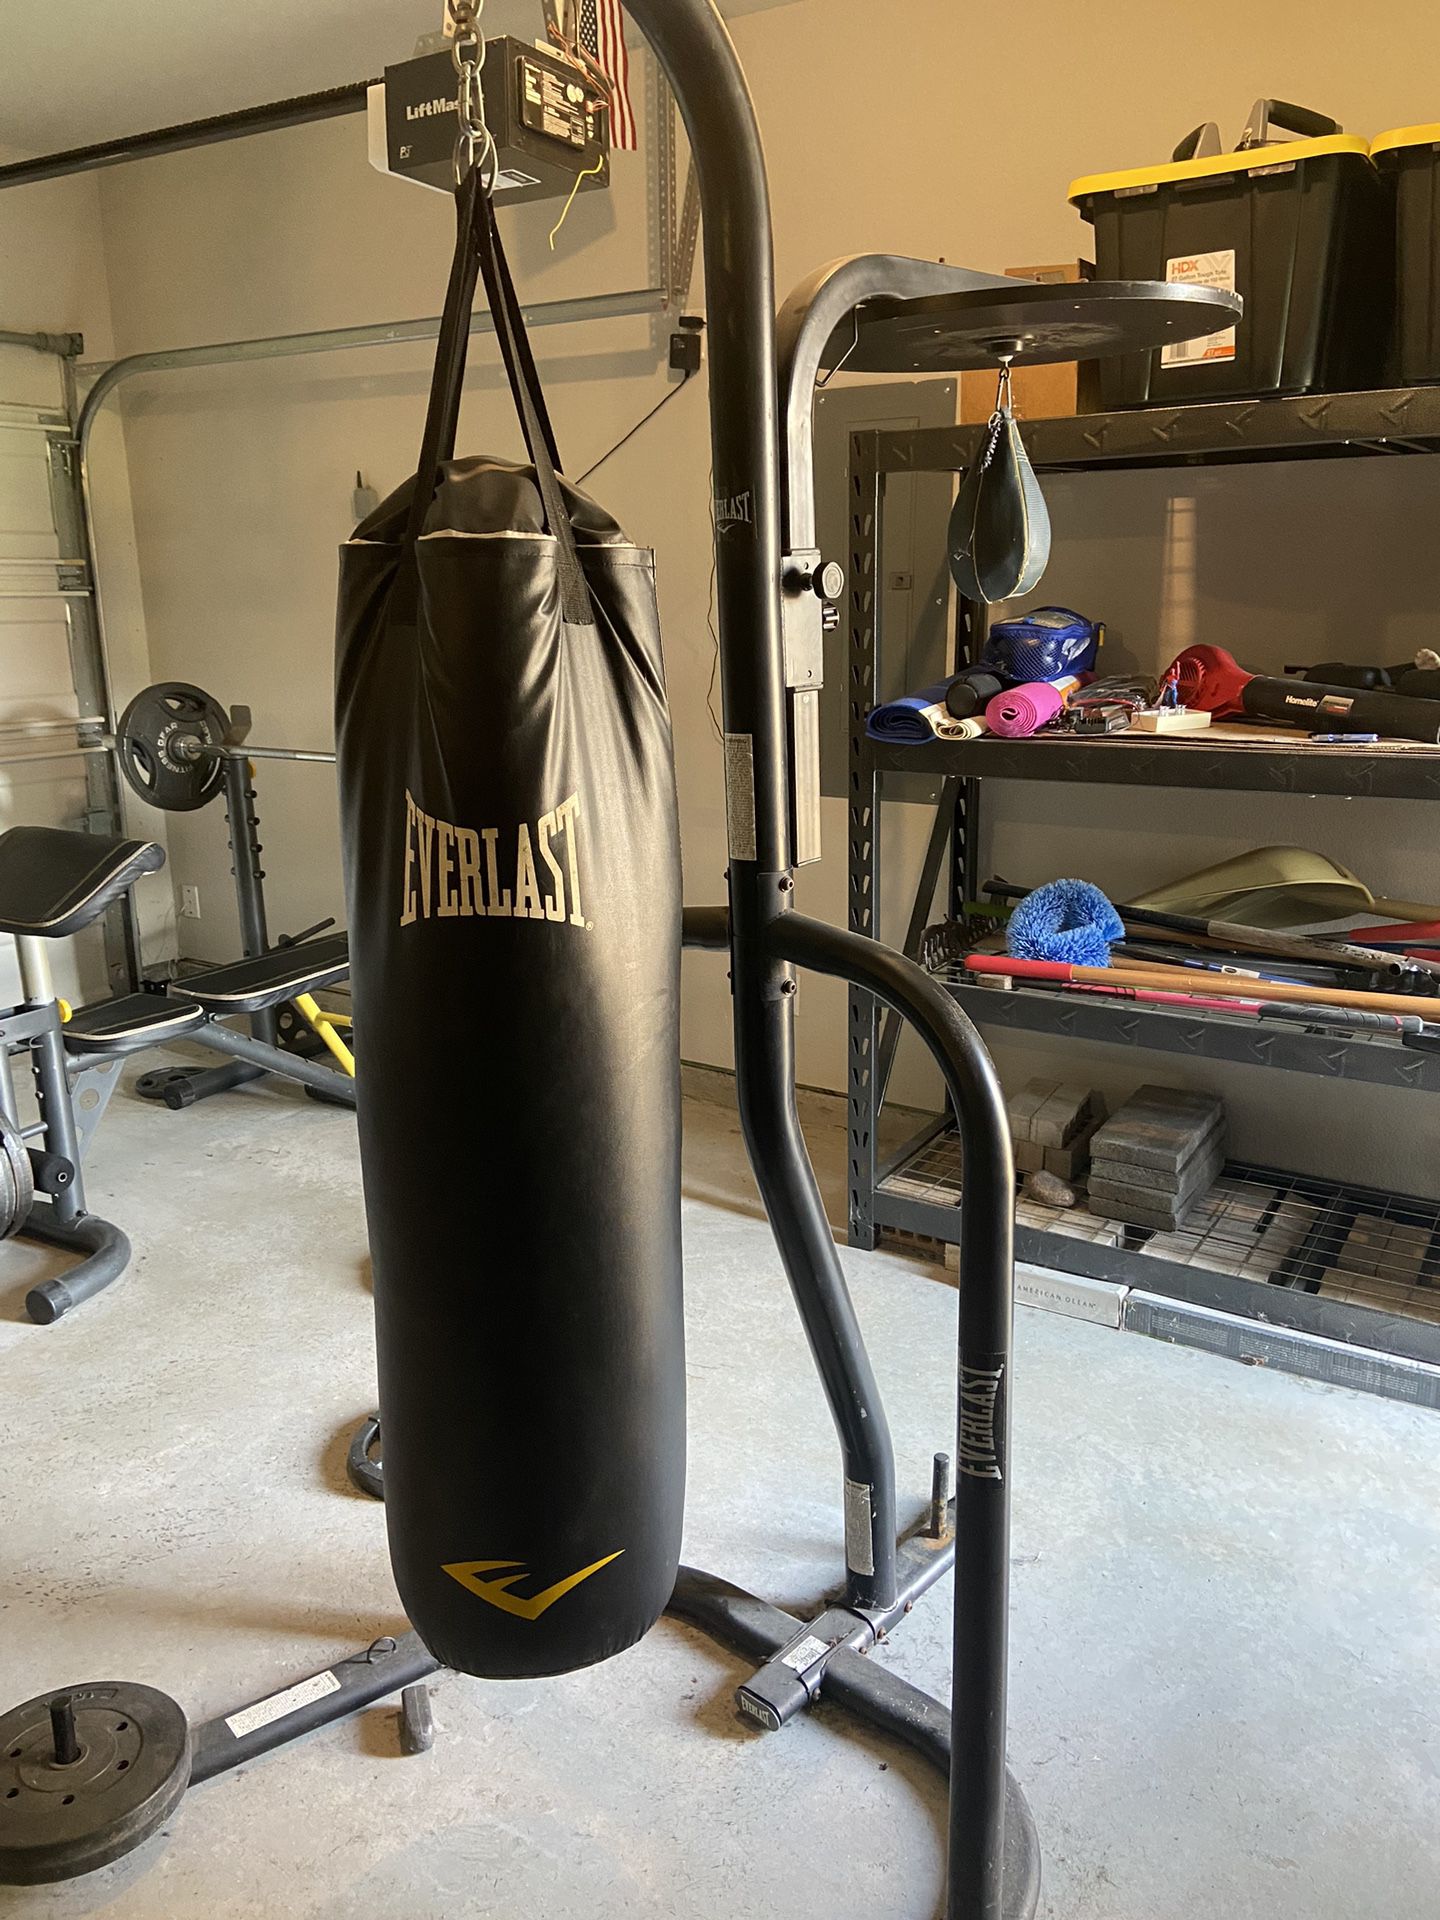 Everlast Boxing Stand, 100 Lb Bag And Speed Bag